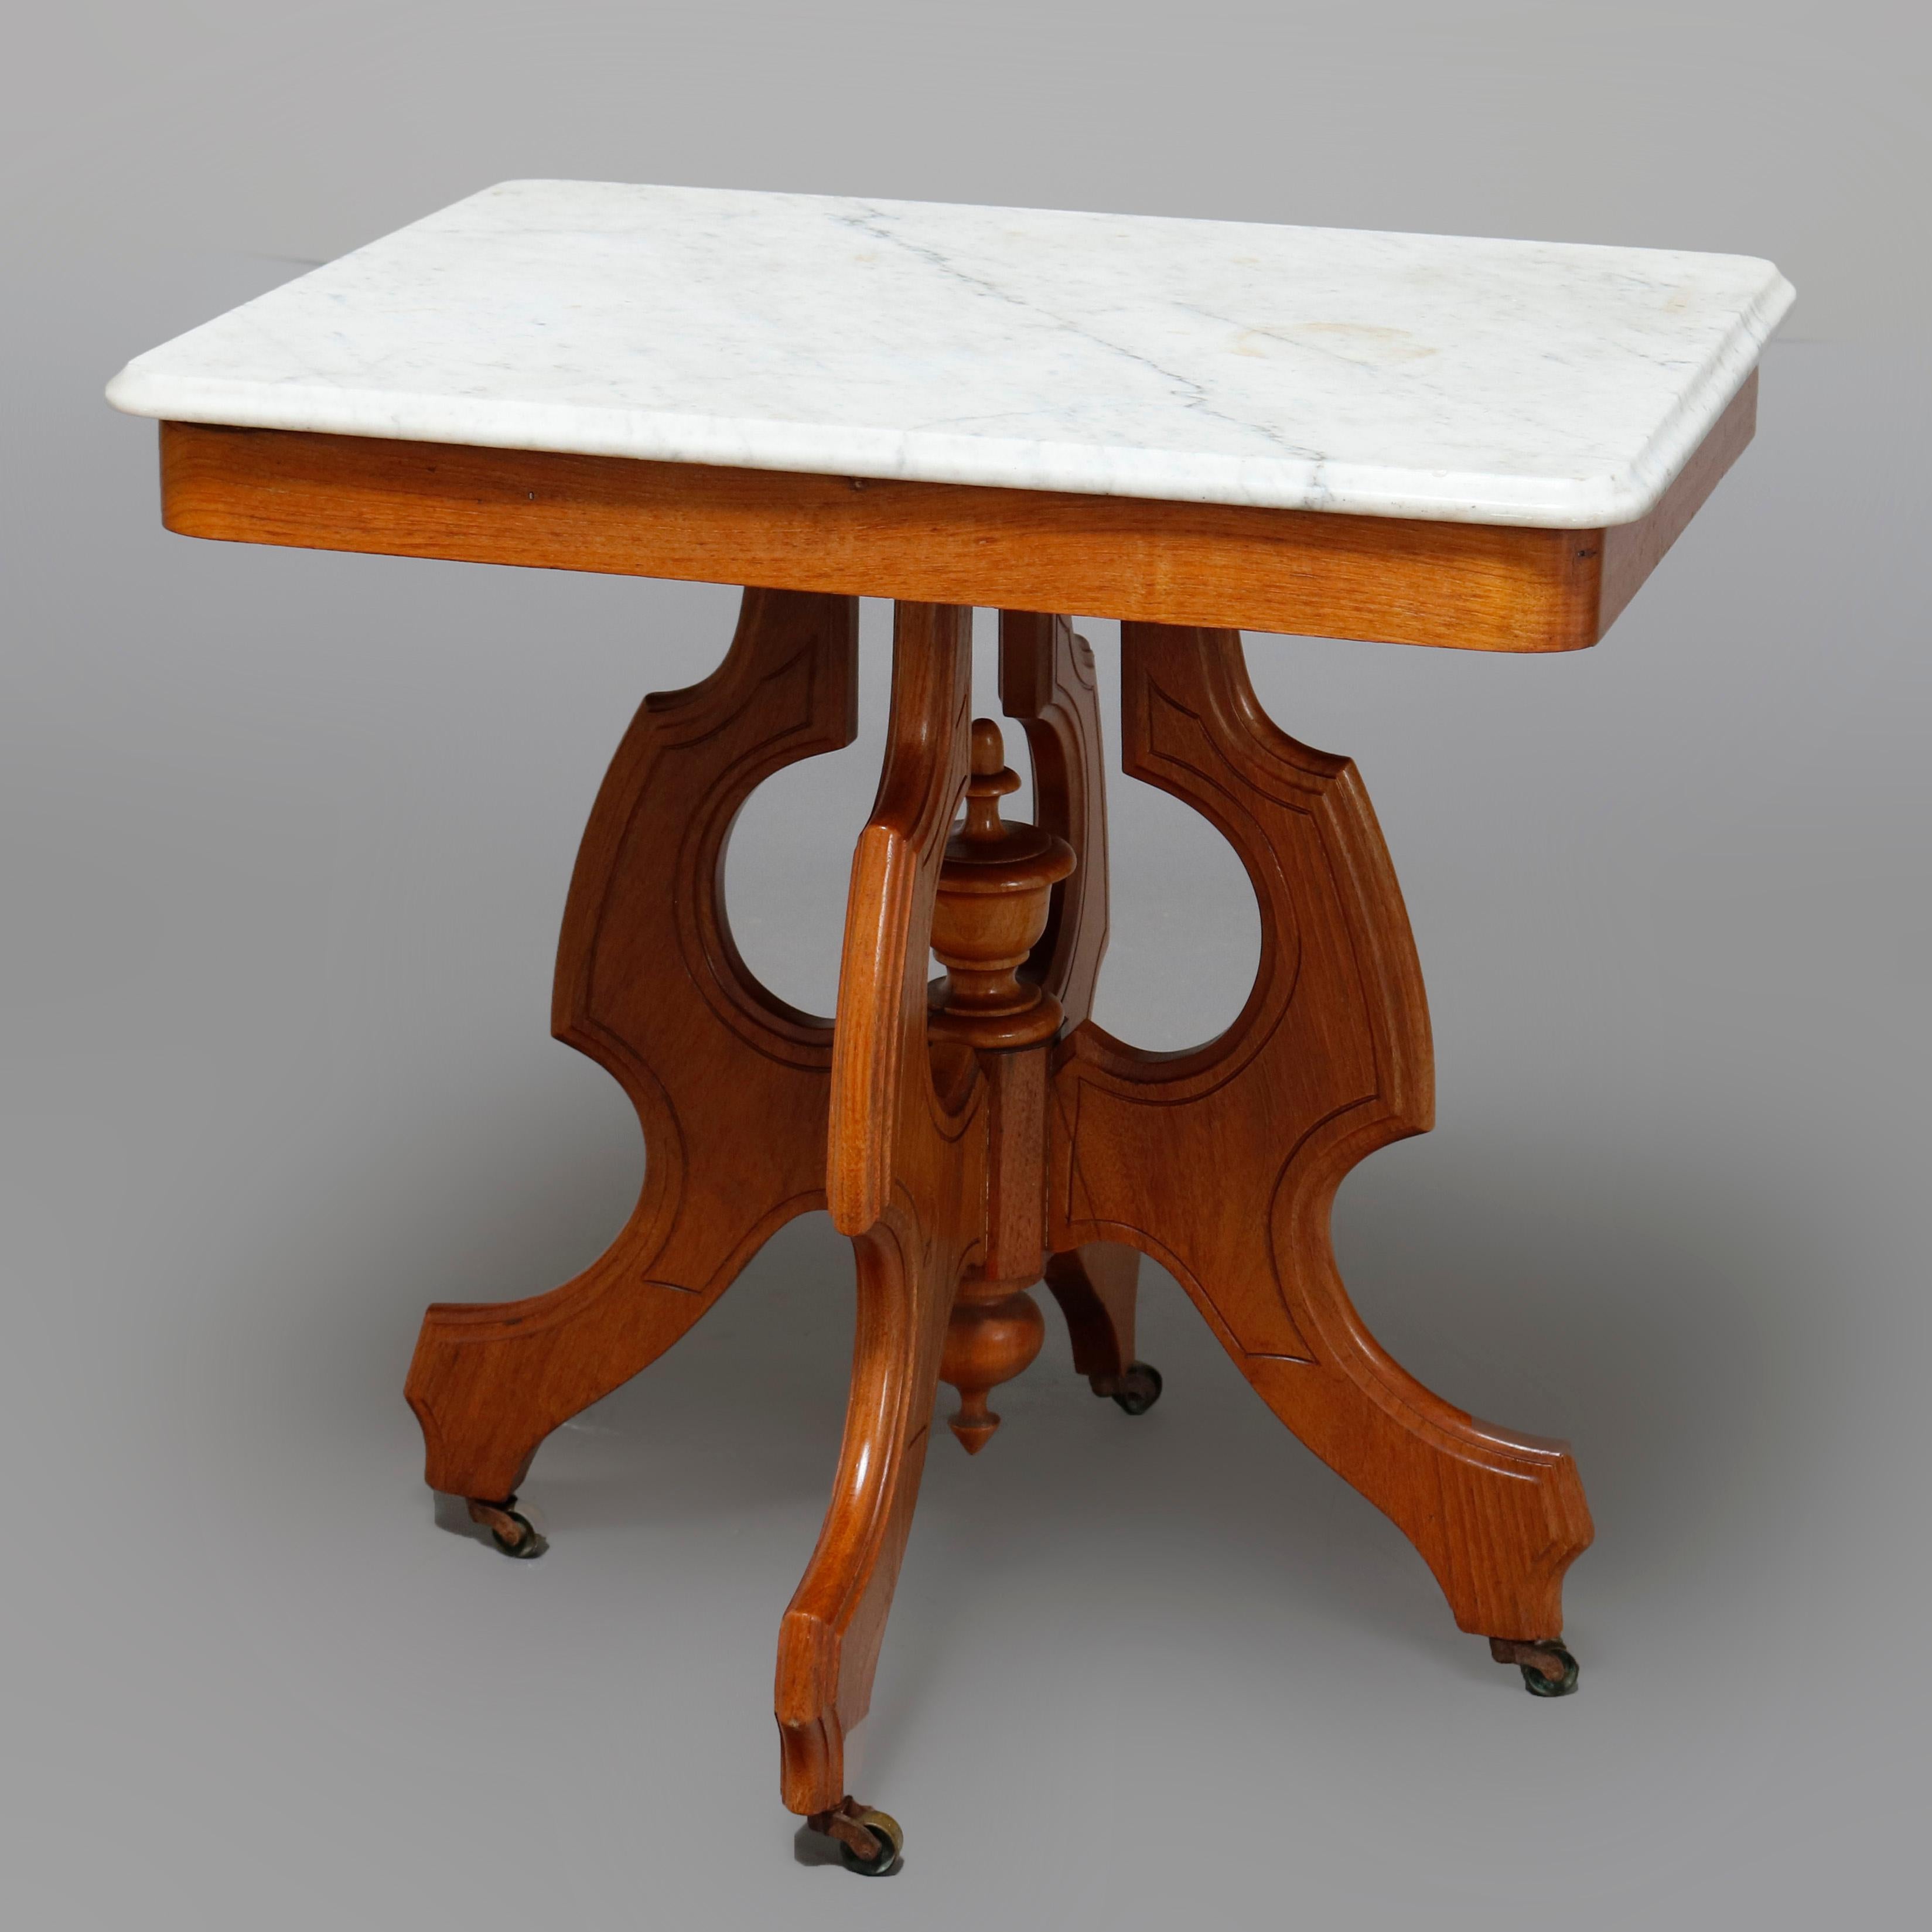 American Antique Victorian Carved Walnut and Beveled Marble Side Table, circa 1880